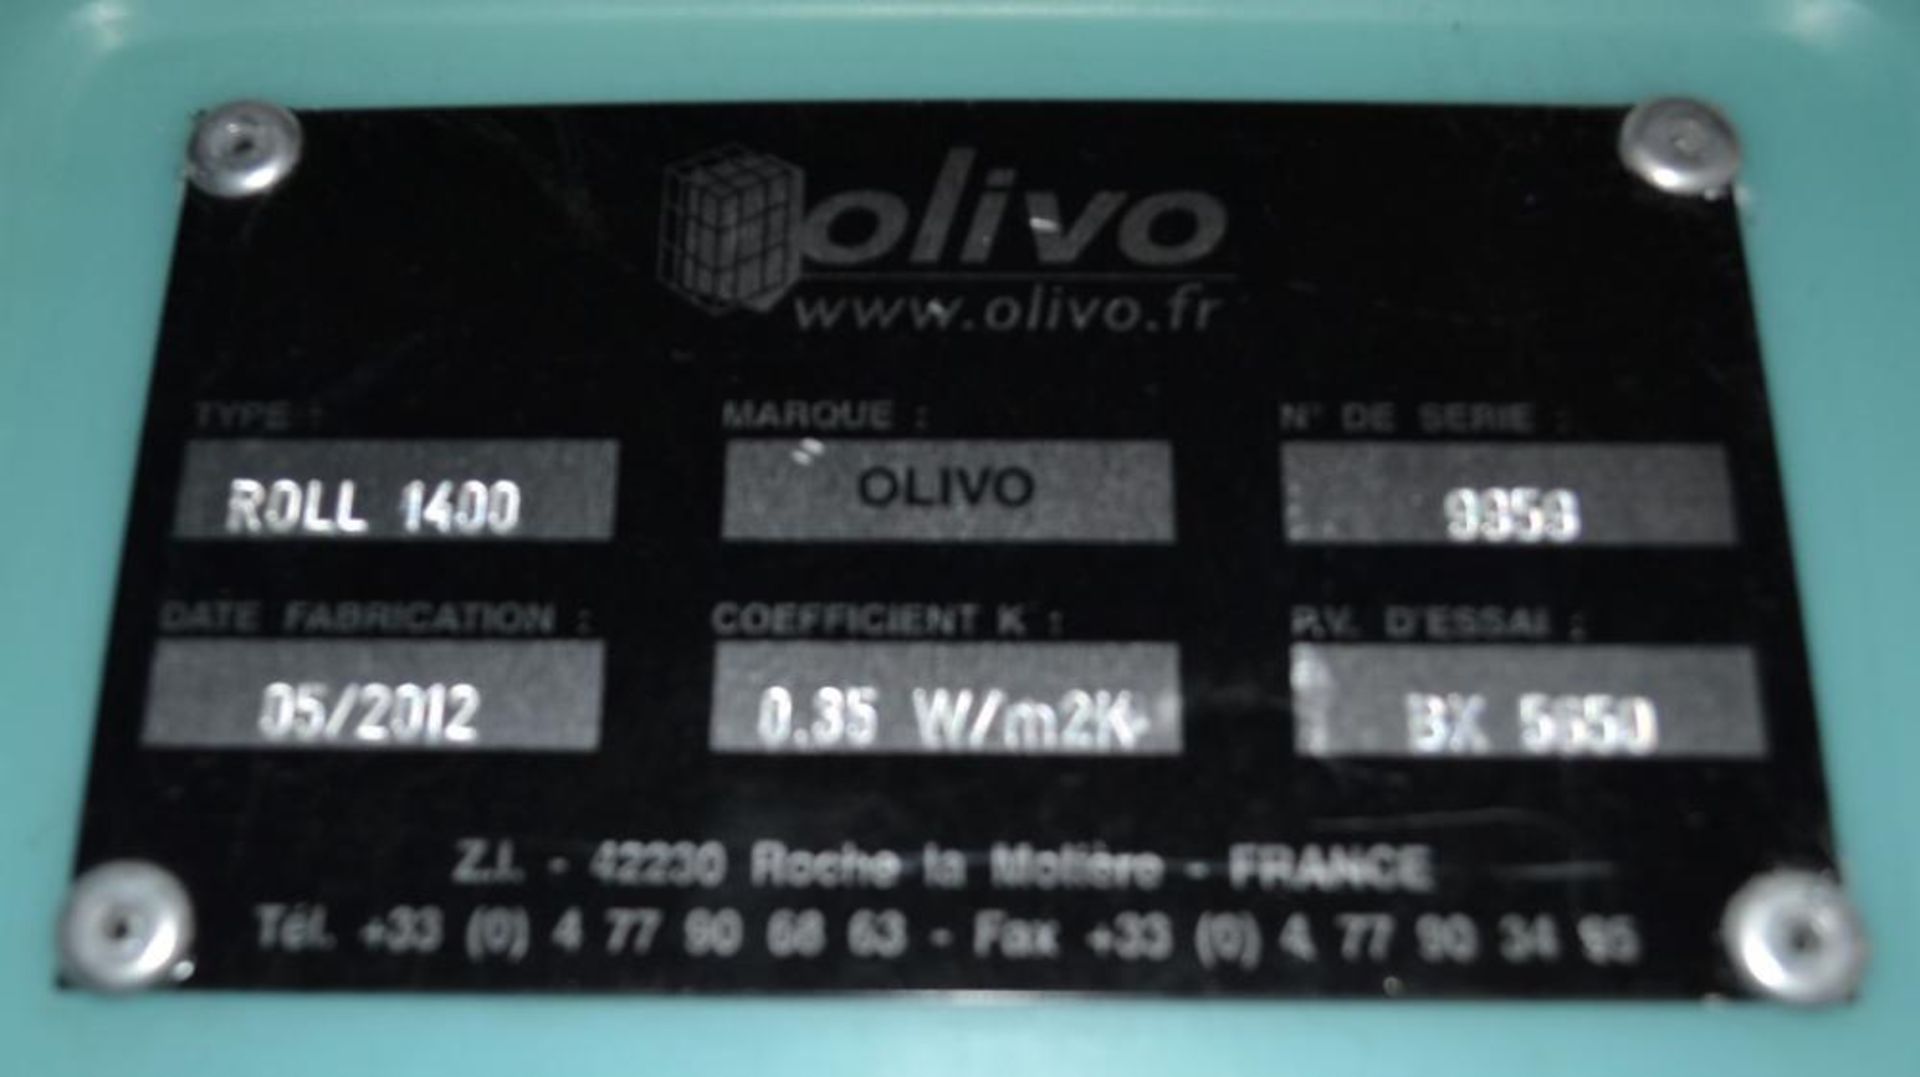 1 x Olivo Roll 1400 Thermo Container - 197x98x117cm - Ref: DRT0OLIVO - CL185 - Location: Stoke-on- - Image 6 of 10